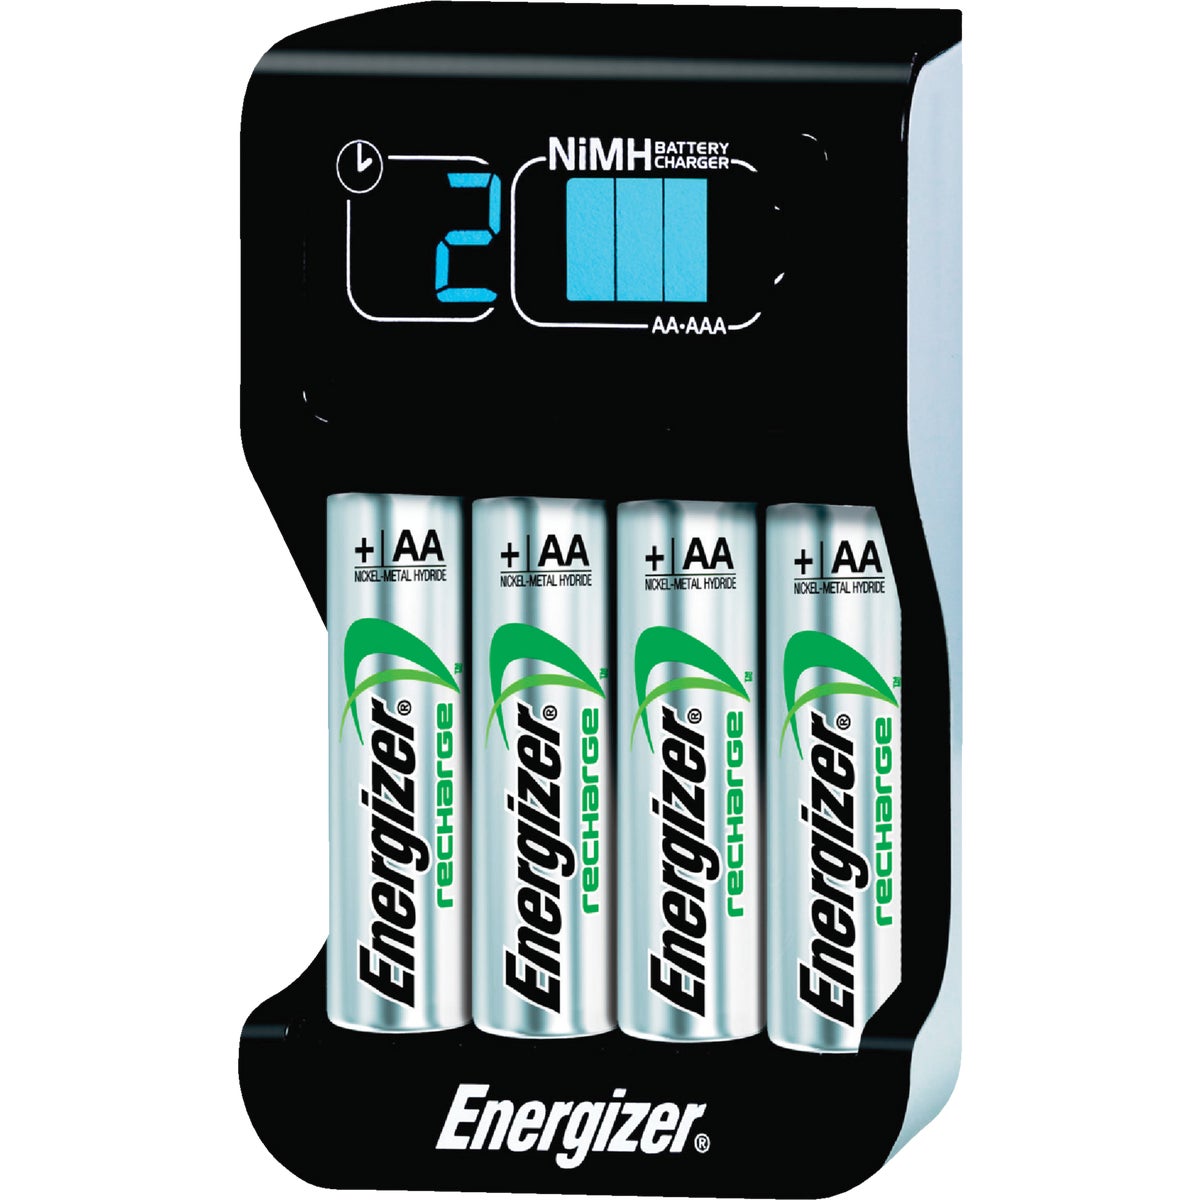 SMART BATTERY CHARGER